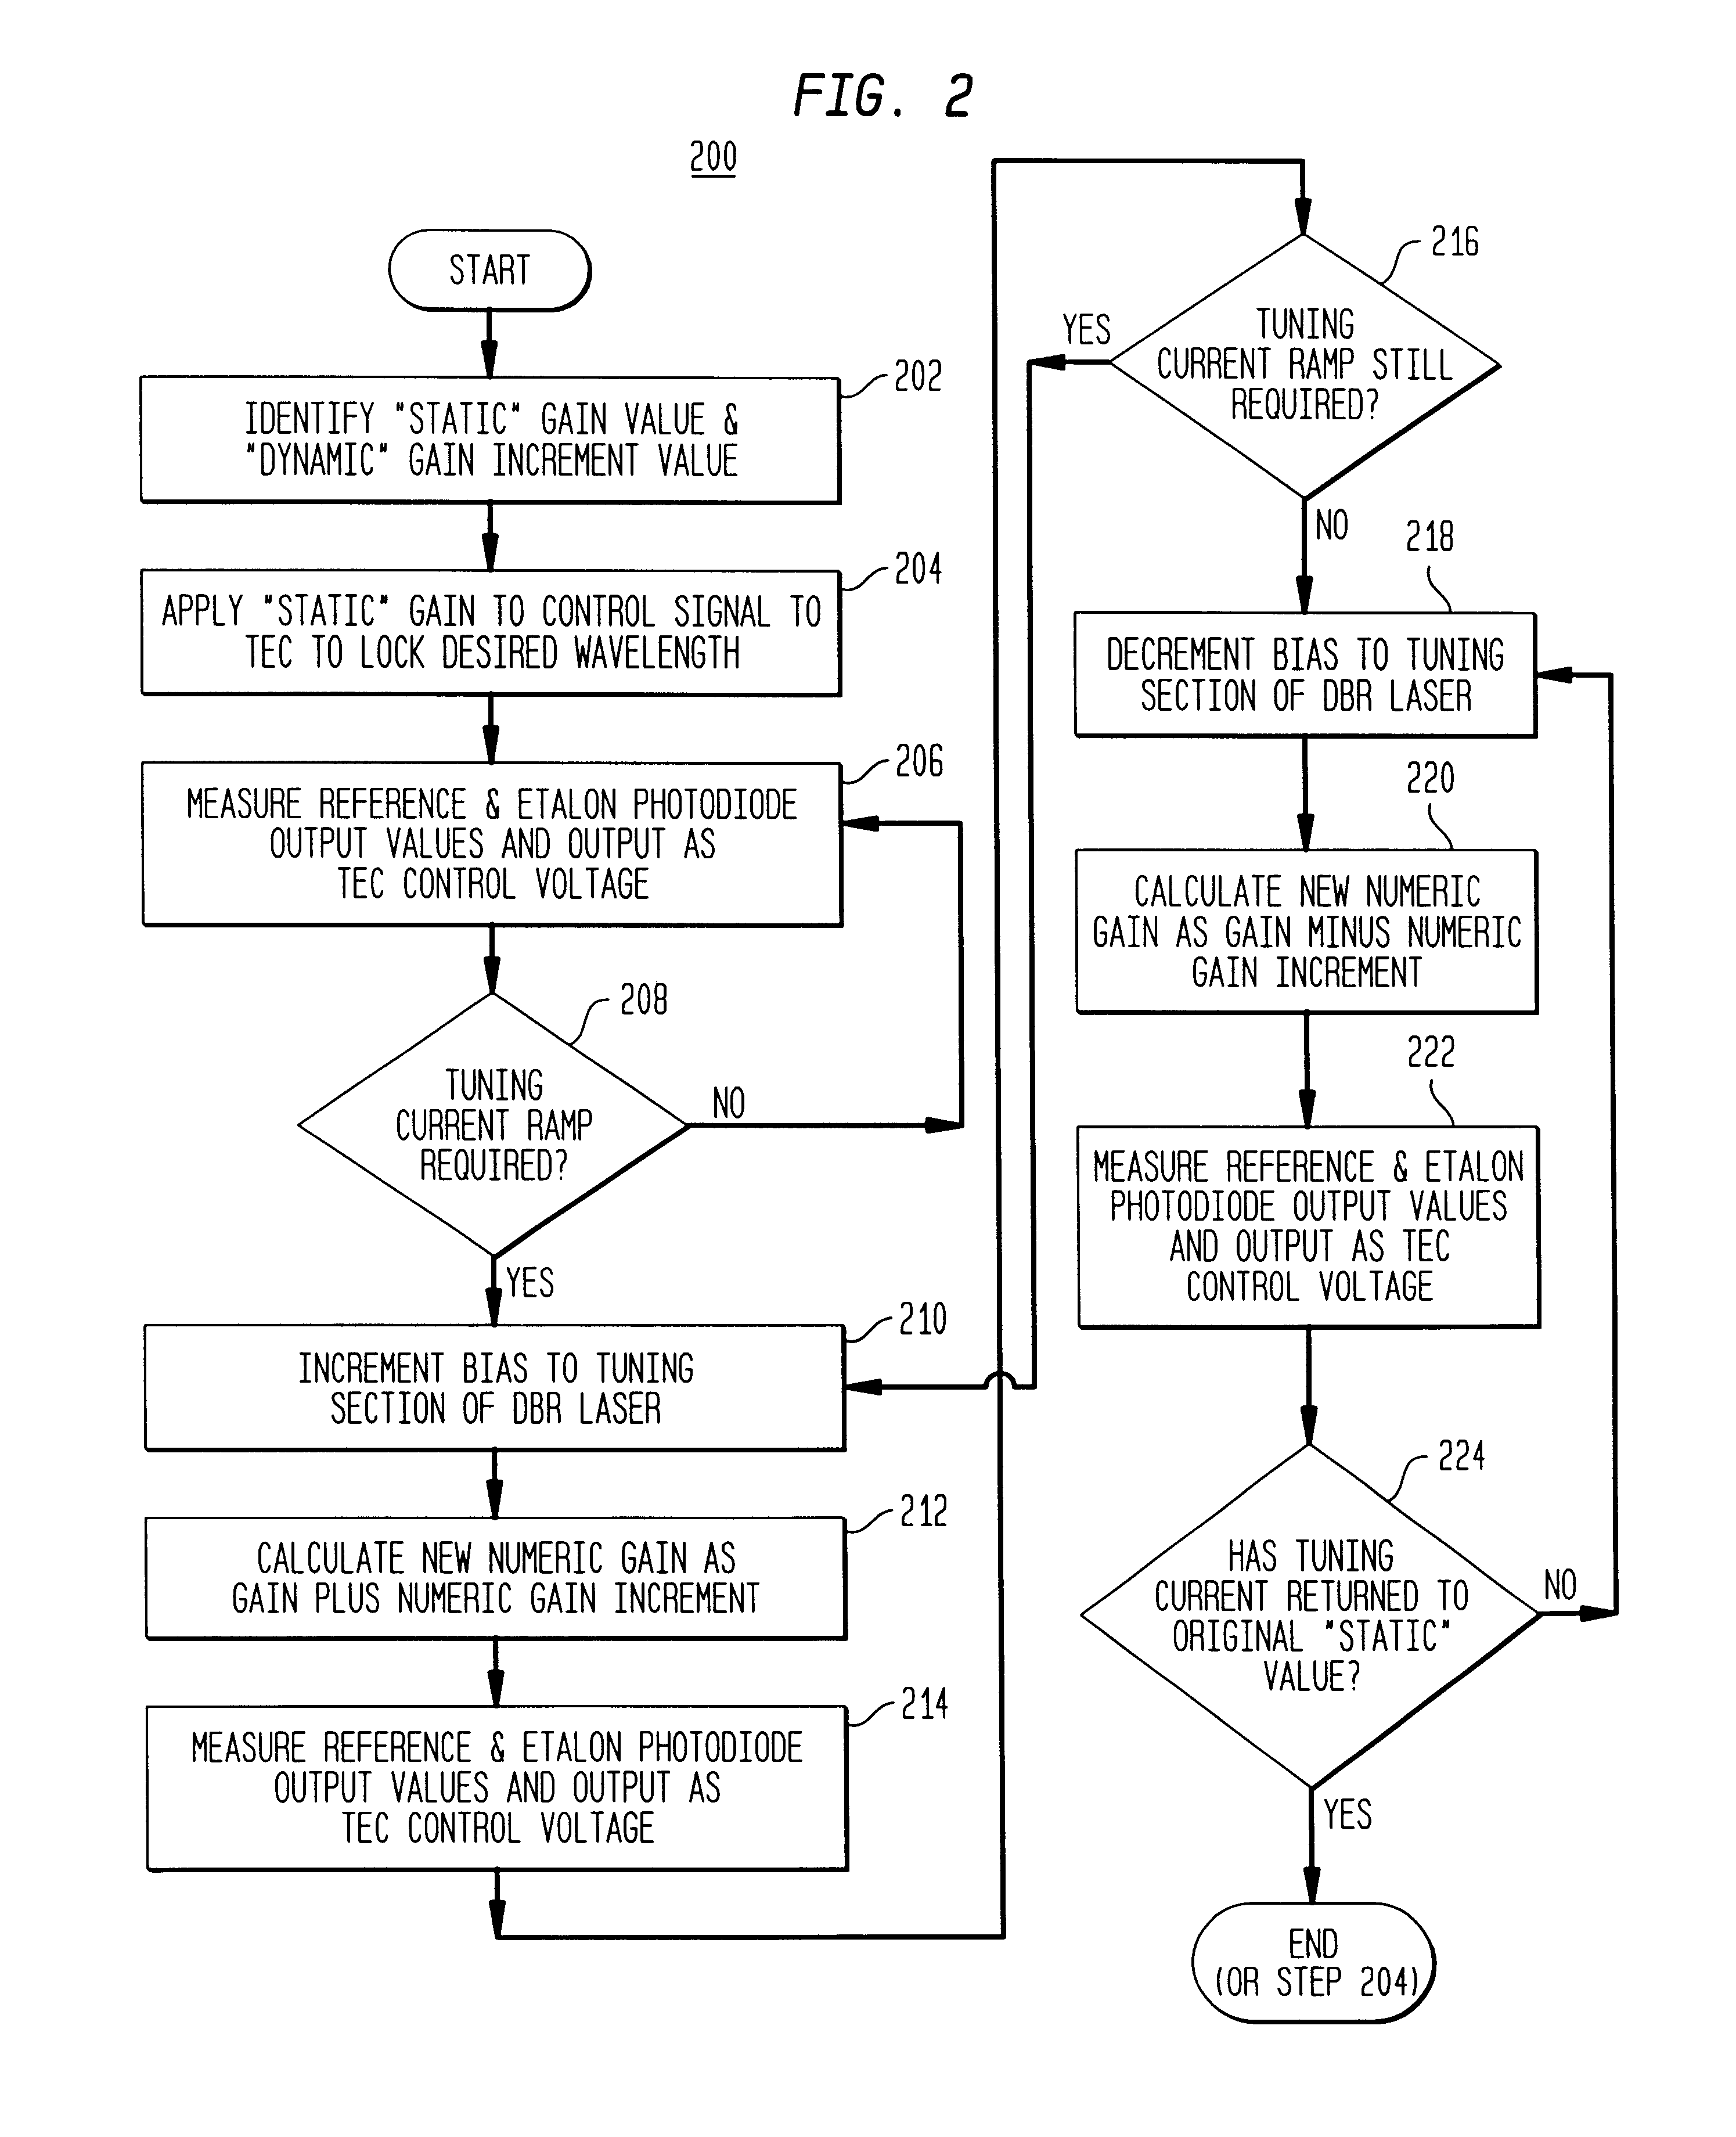 Control system for use with DBR lasers